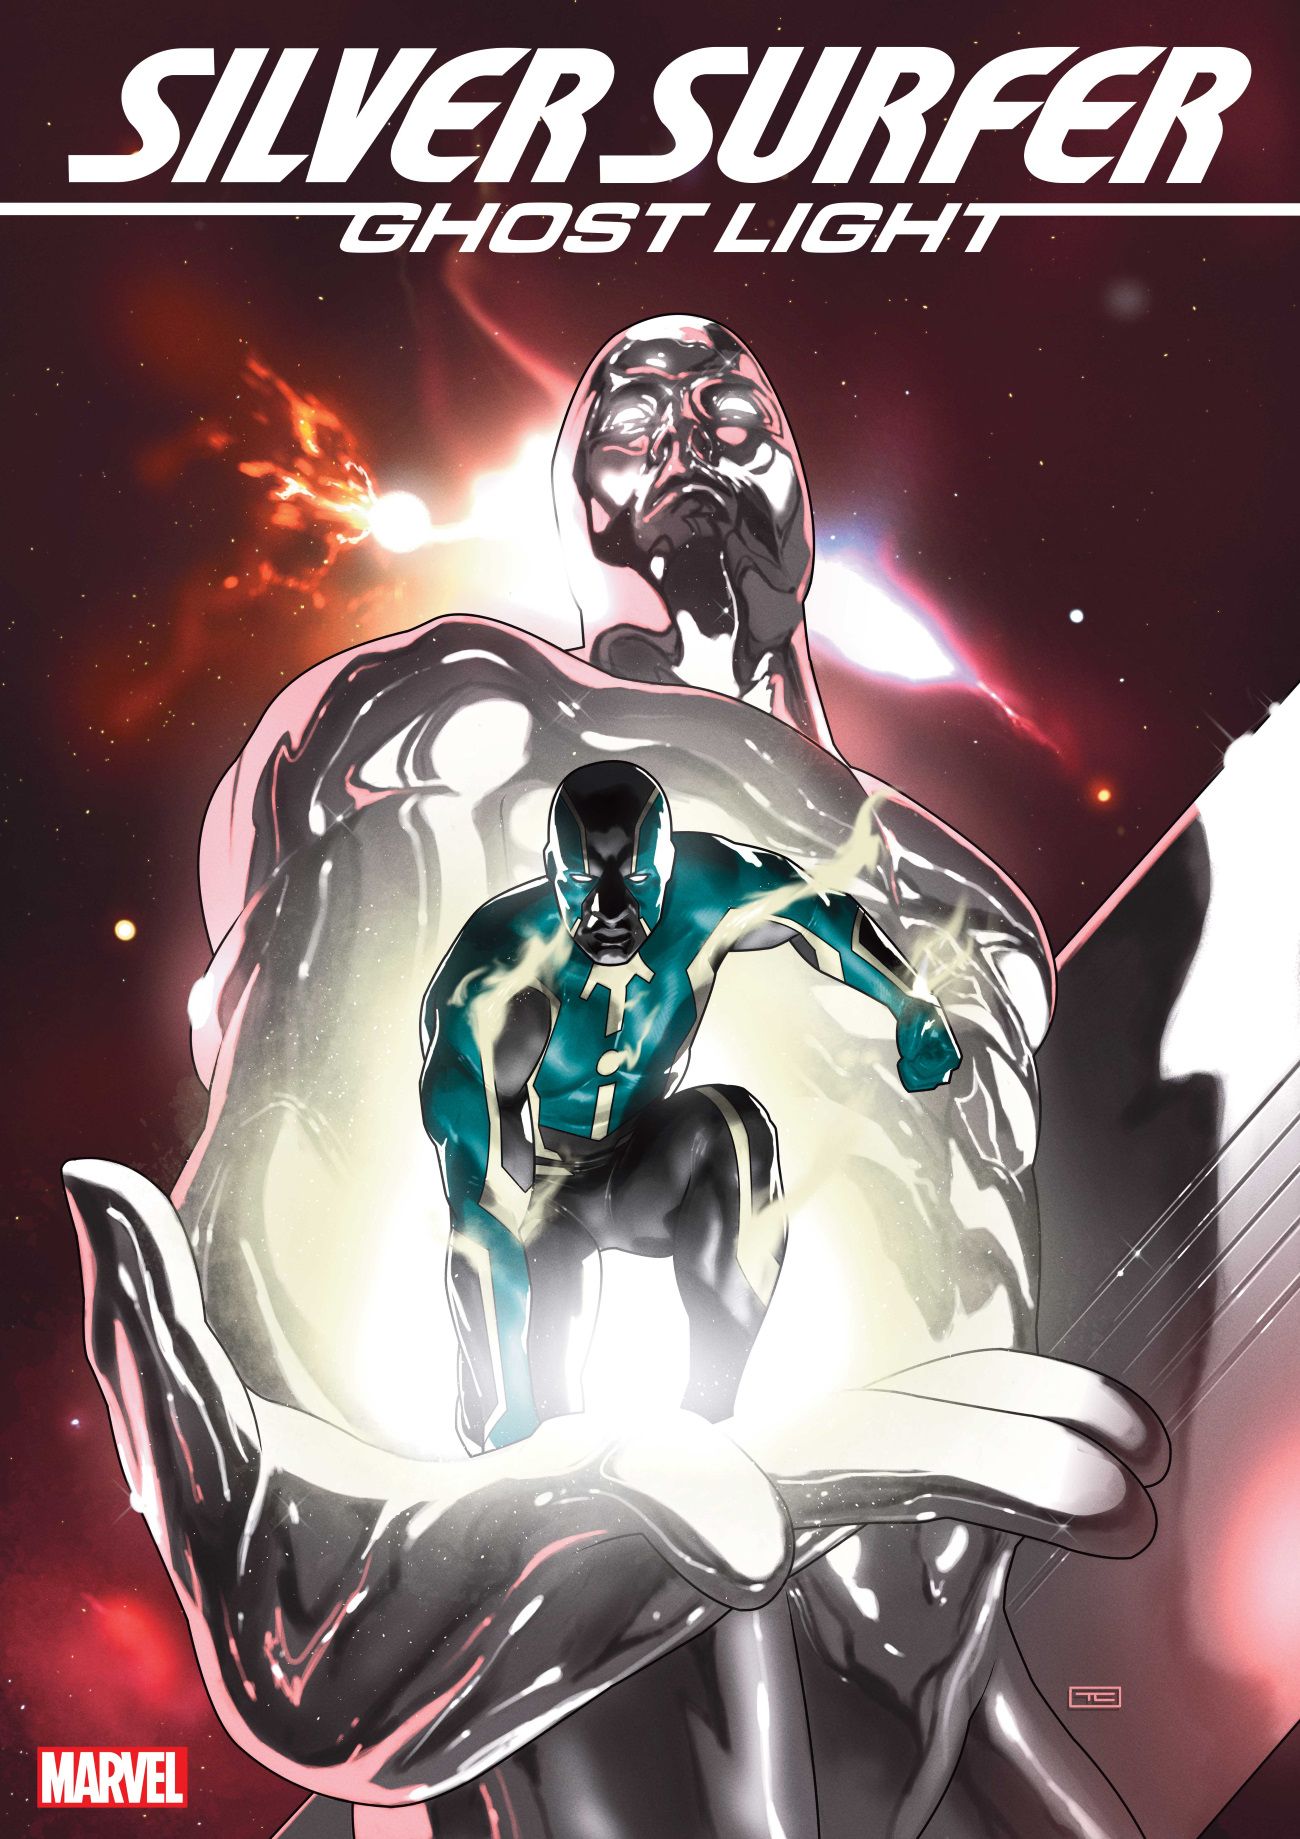 Silver-Surfer-Ghost-Light-Comic-Cover-1